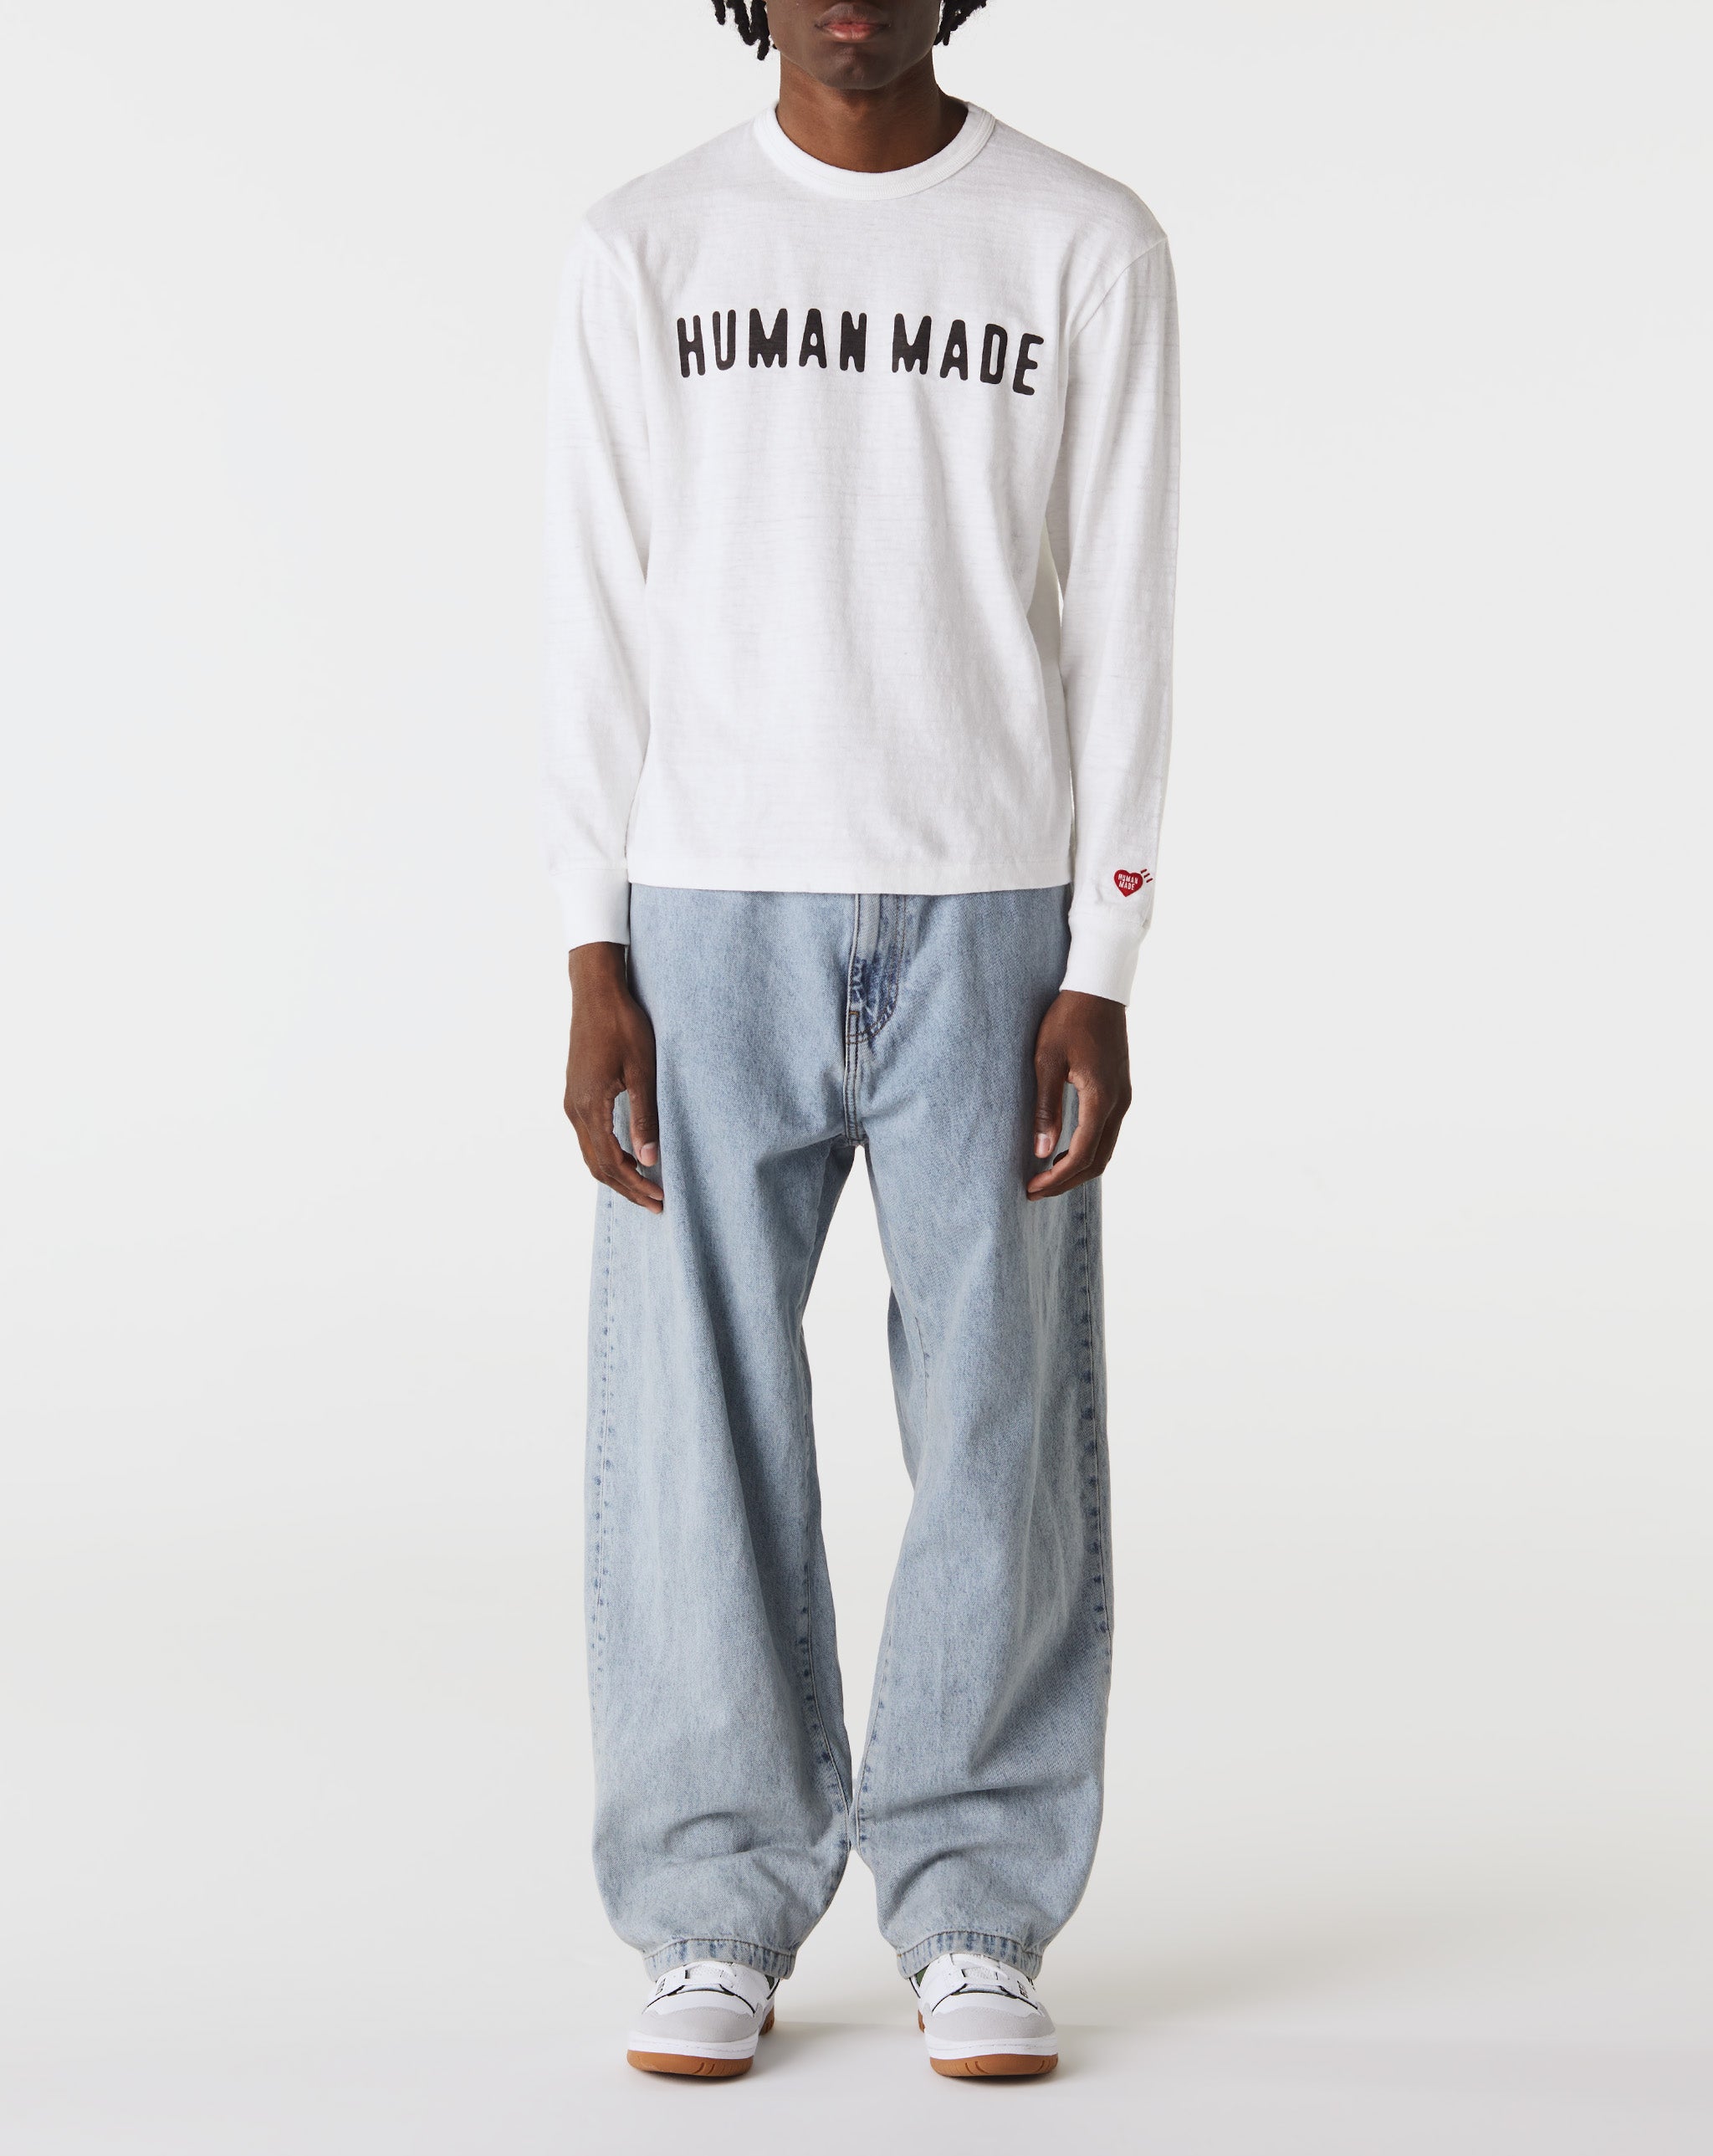 Human Made Graphic L/S T-Shirt  - XHIBITION